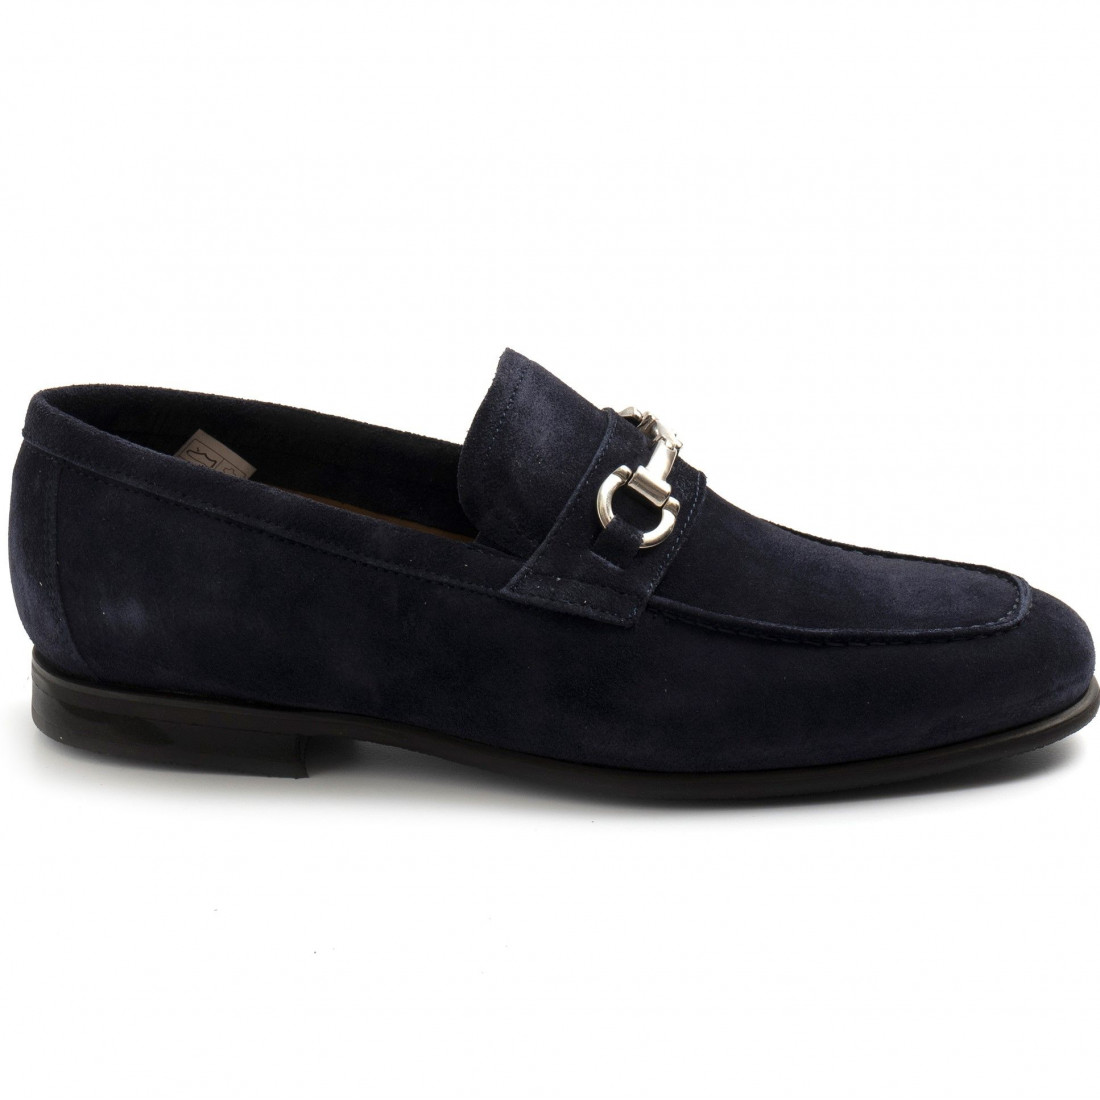 Sangiorgio men's moccasin in blue suede with metal clamp